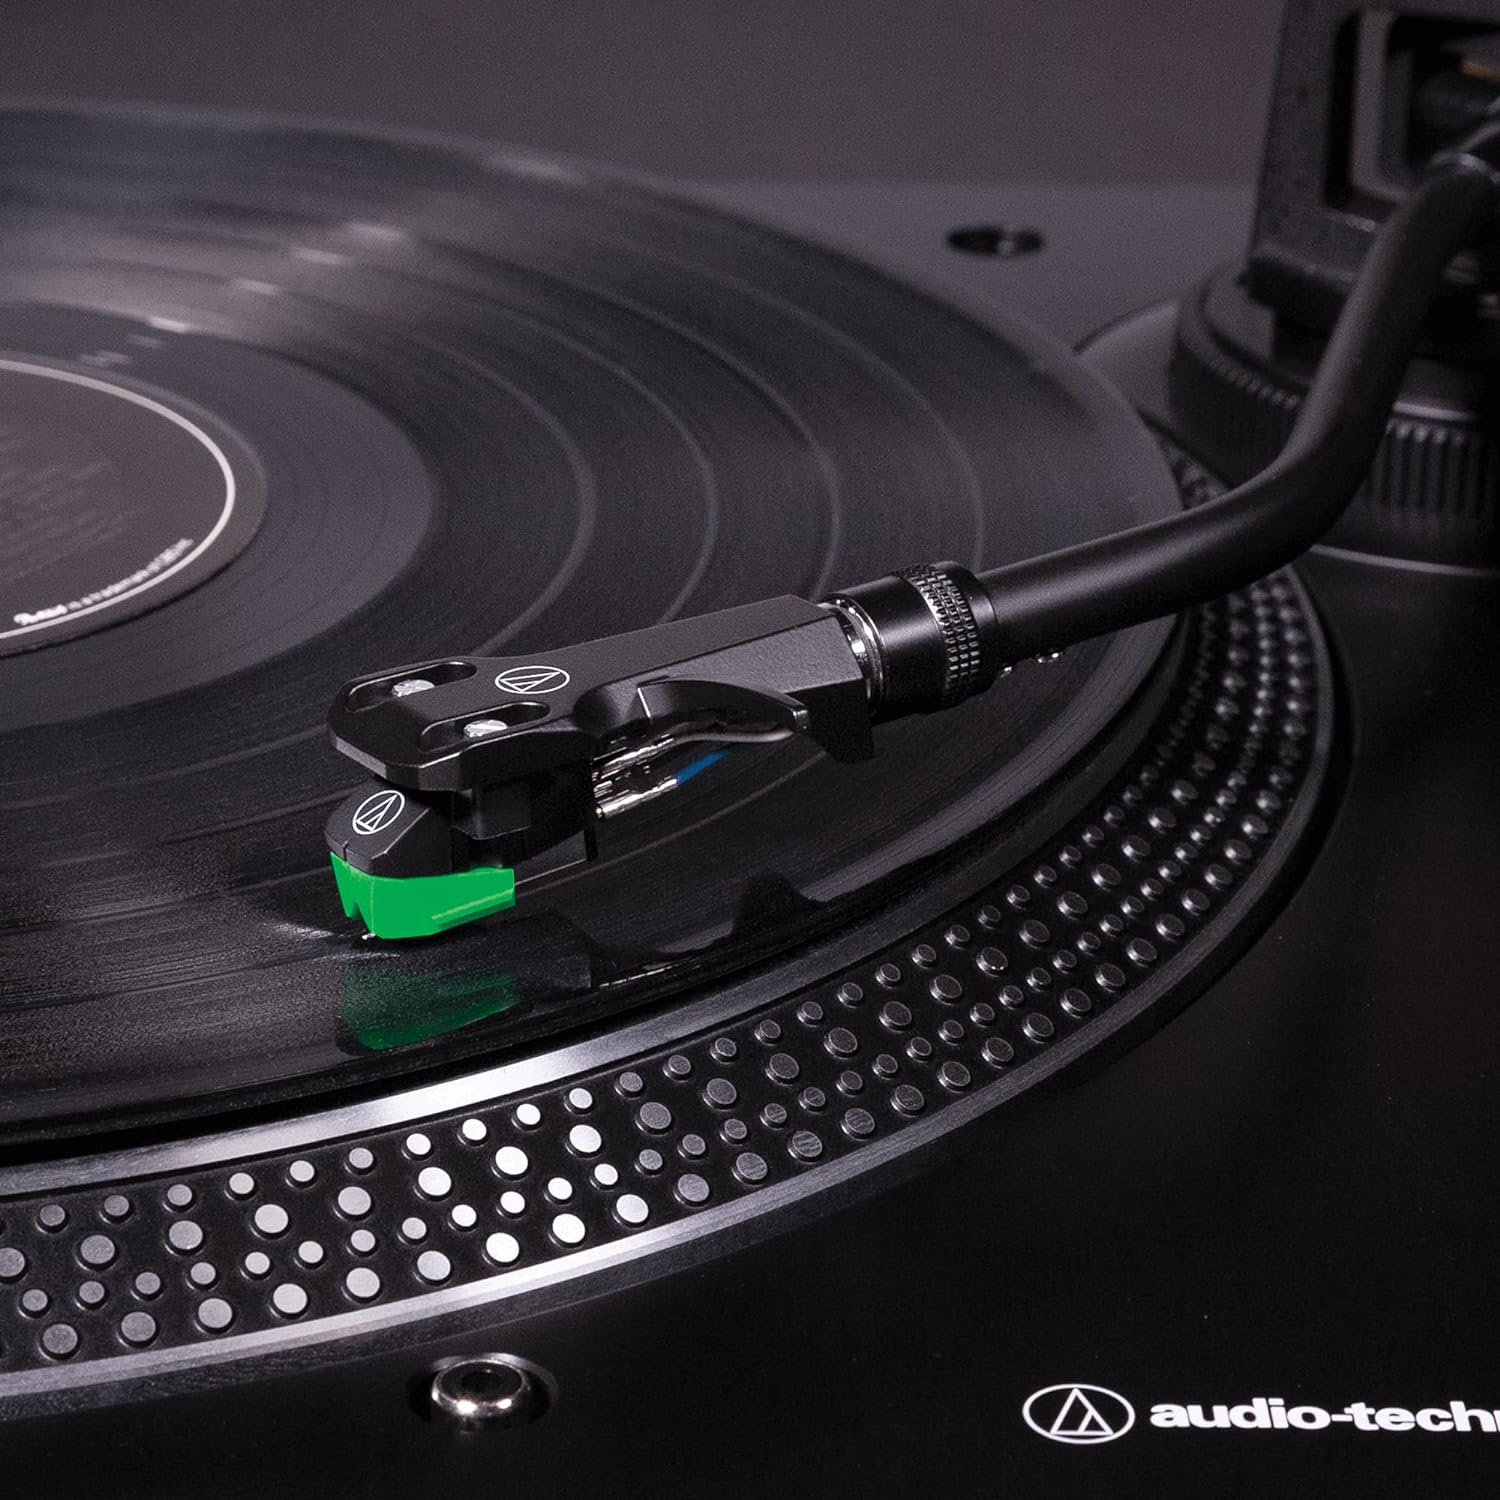 Audio-Technica AT-LP120XUSB-BK Turntable Review